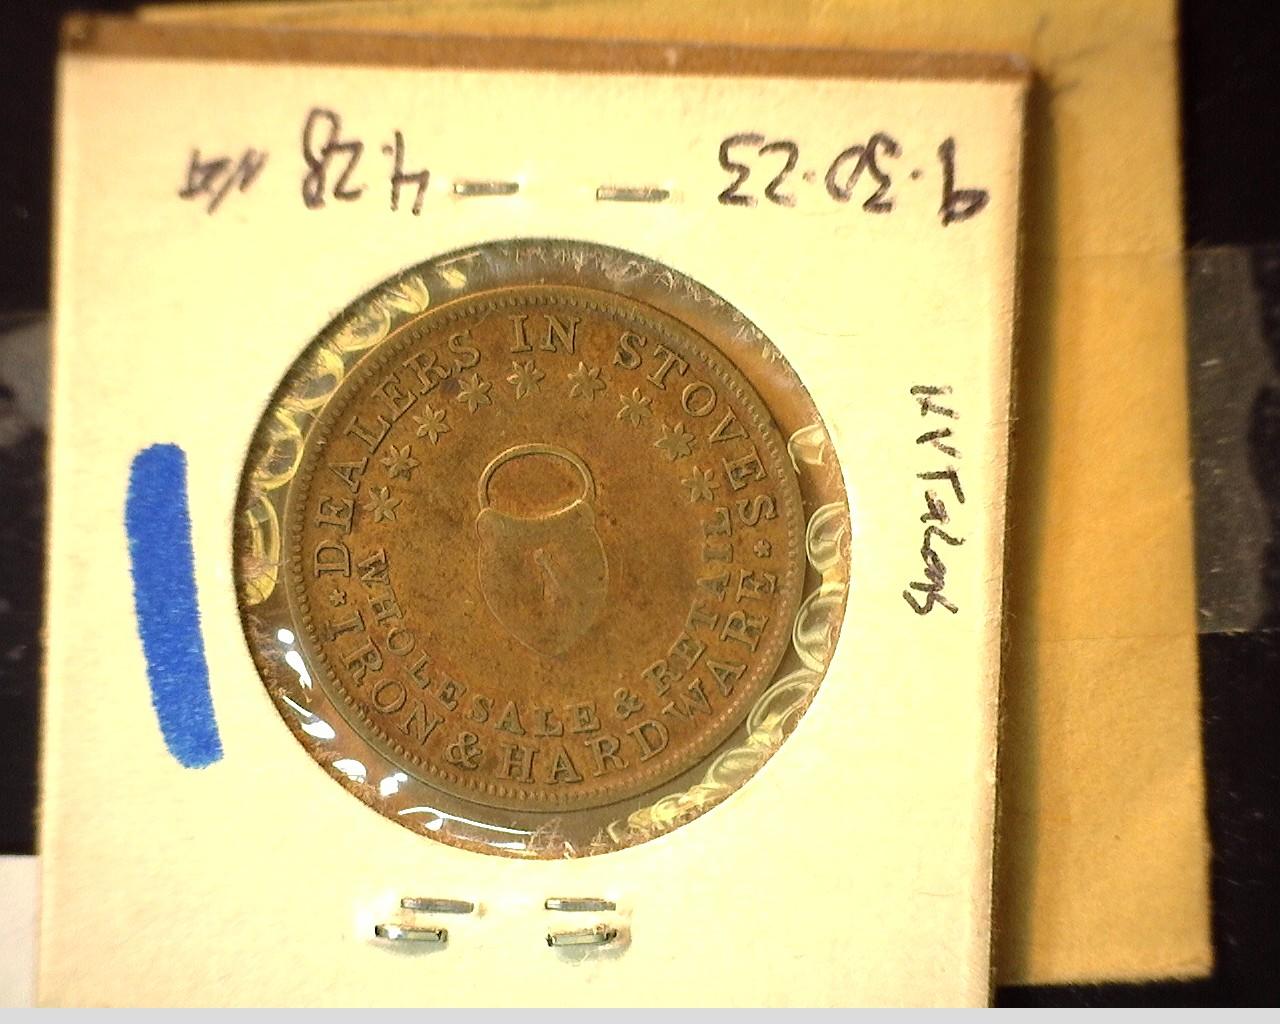 1850's Foster & Perry, Grand Rapids Michigan, Dealer in Stoves and Iron Hardware Token.